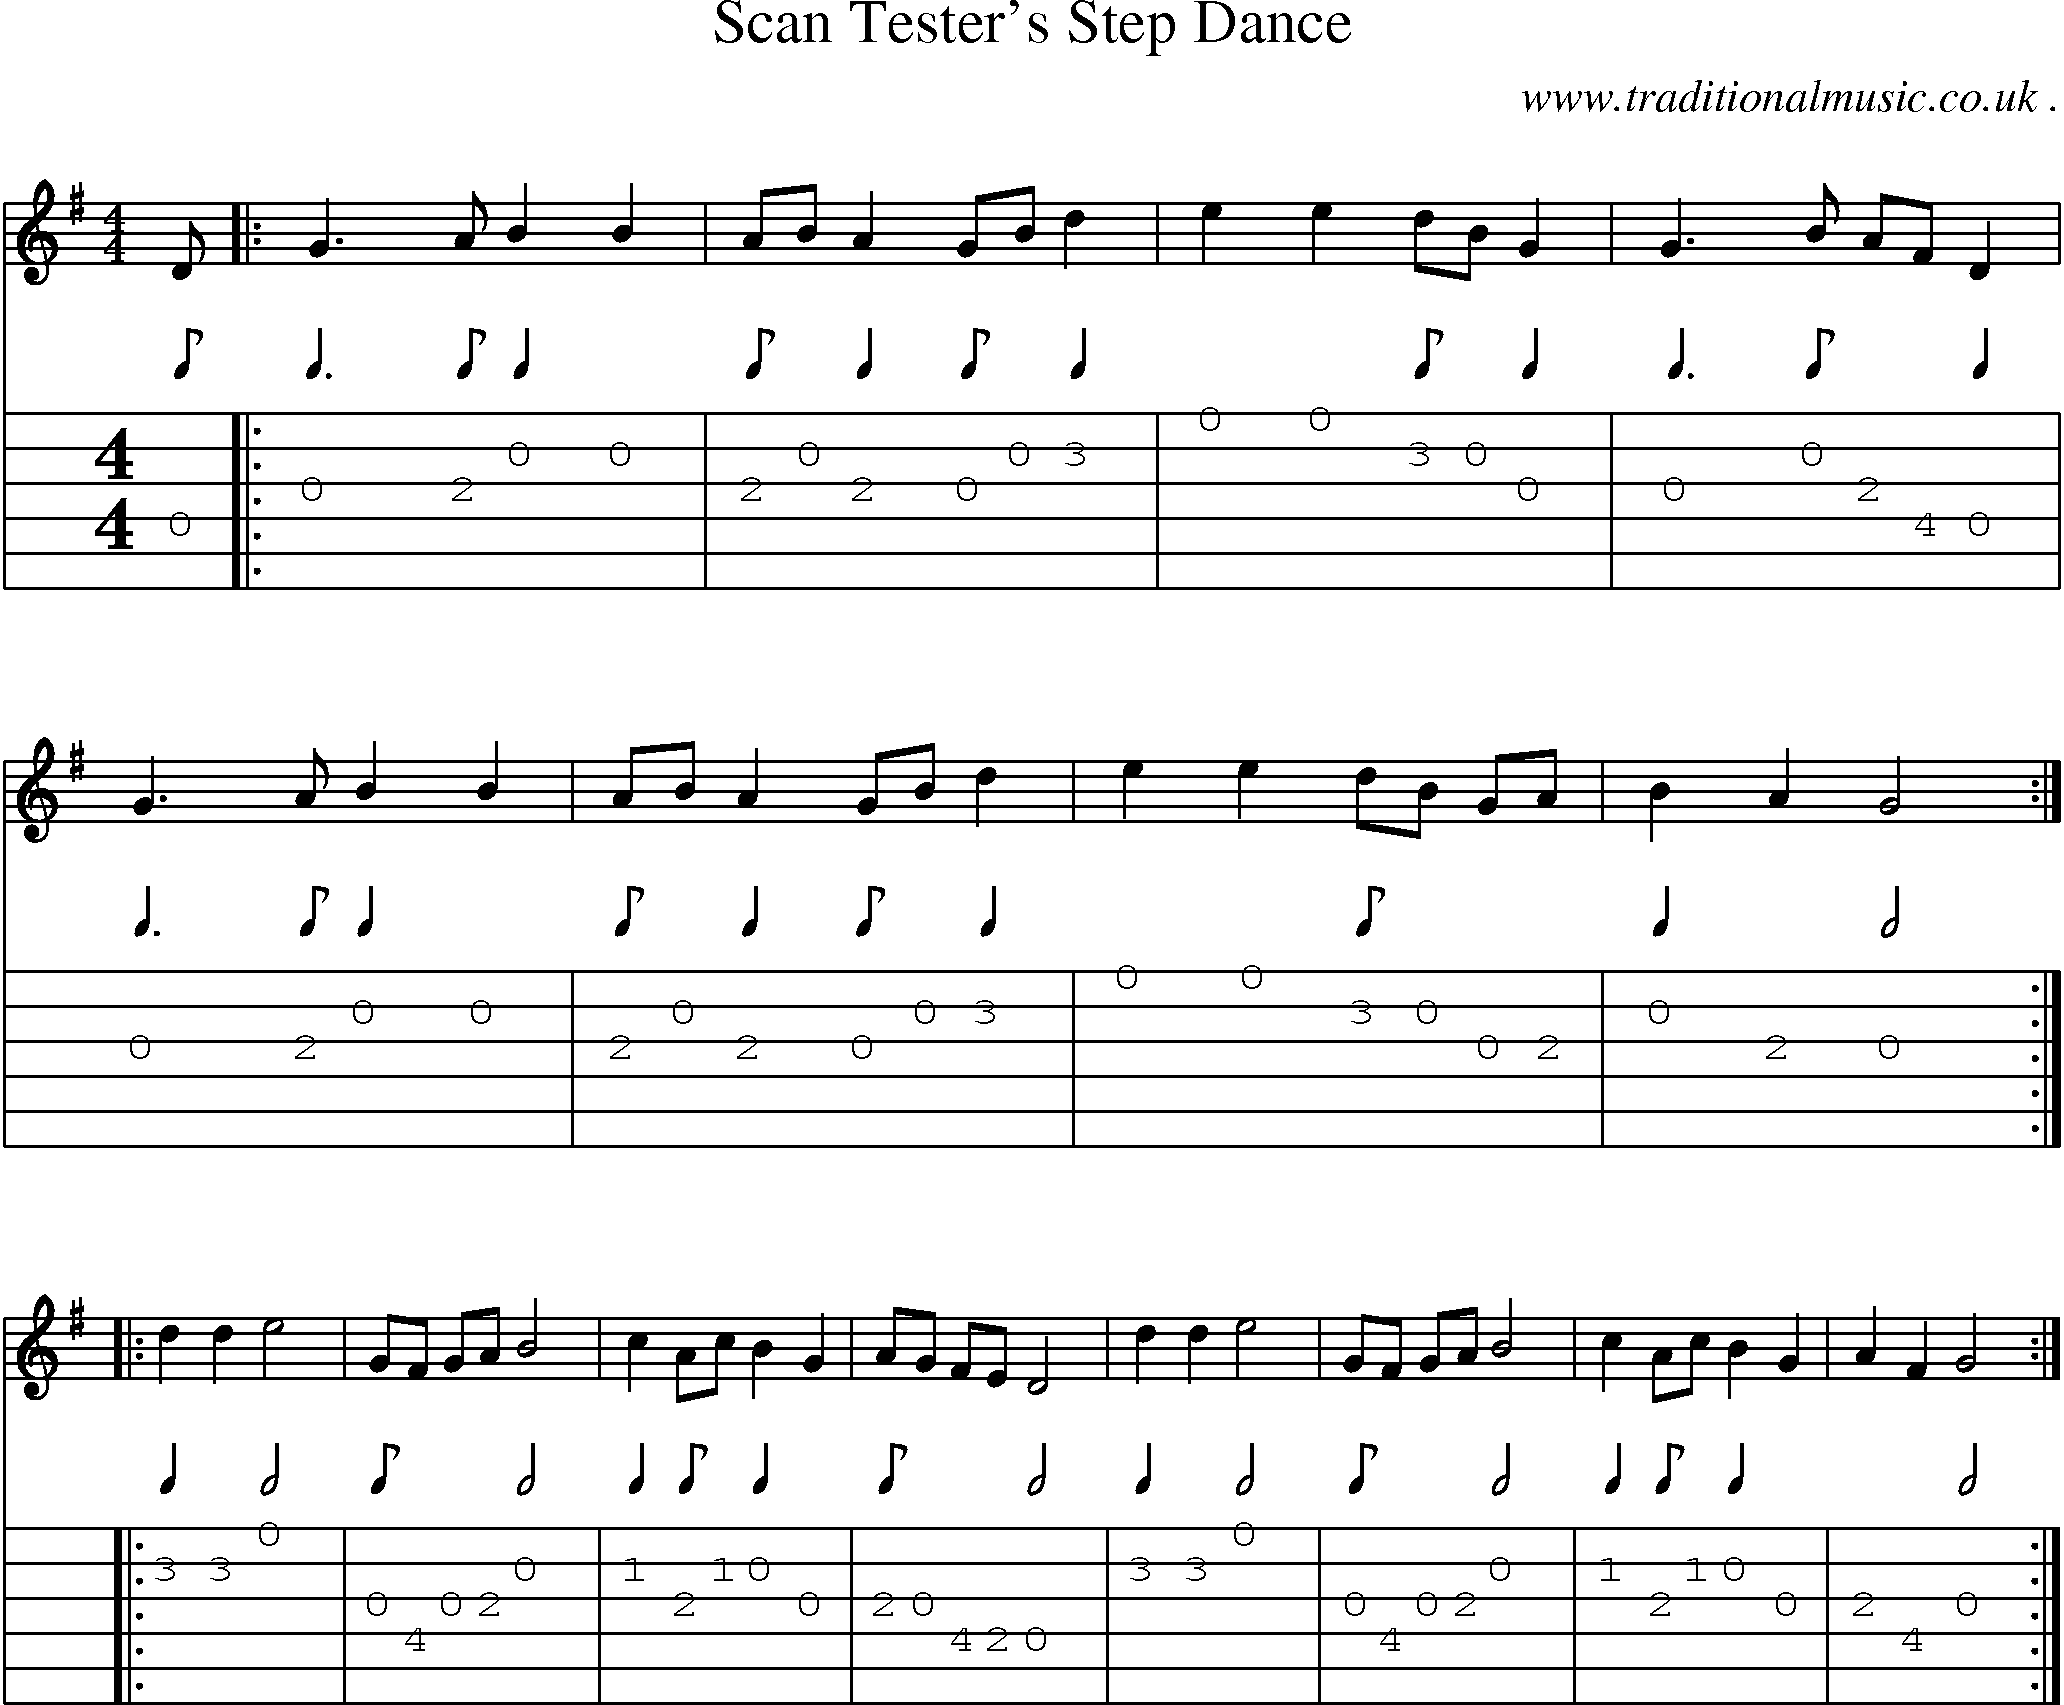 Sheet-Music and Guitar Tabs for Scan Testers Step Dance